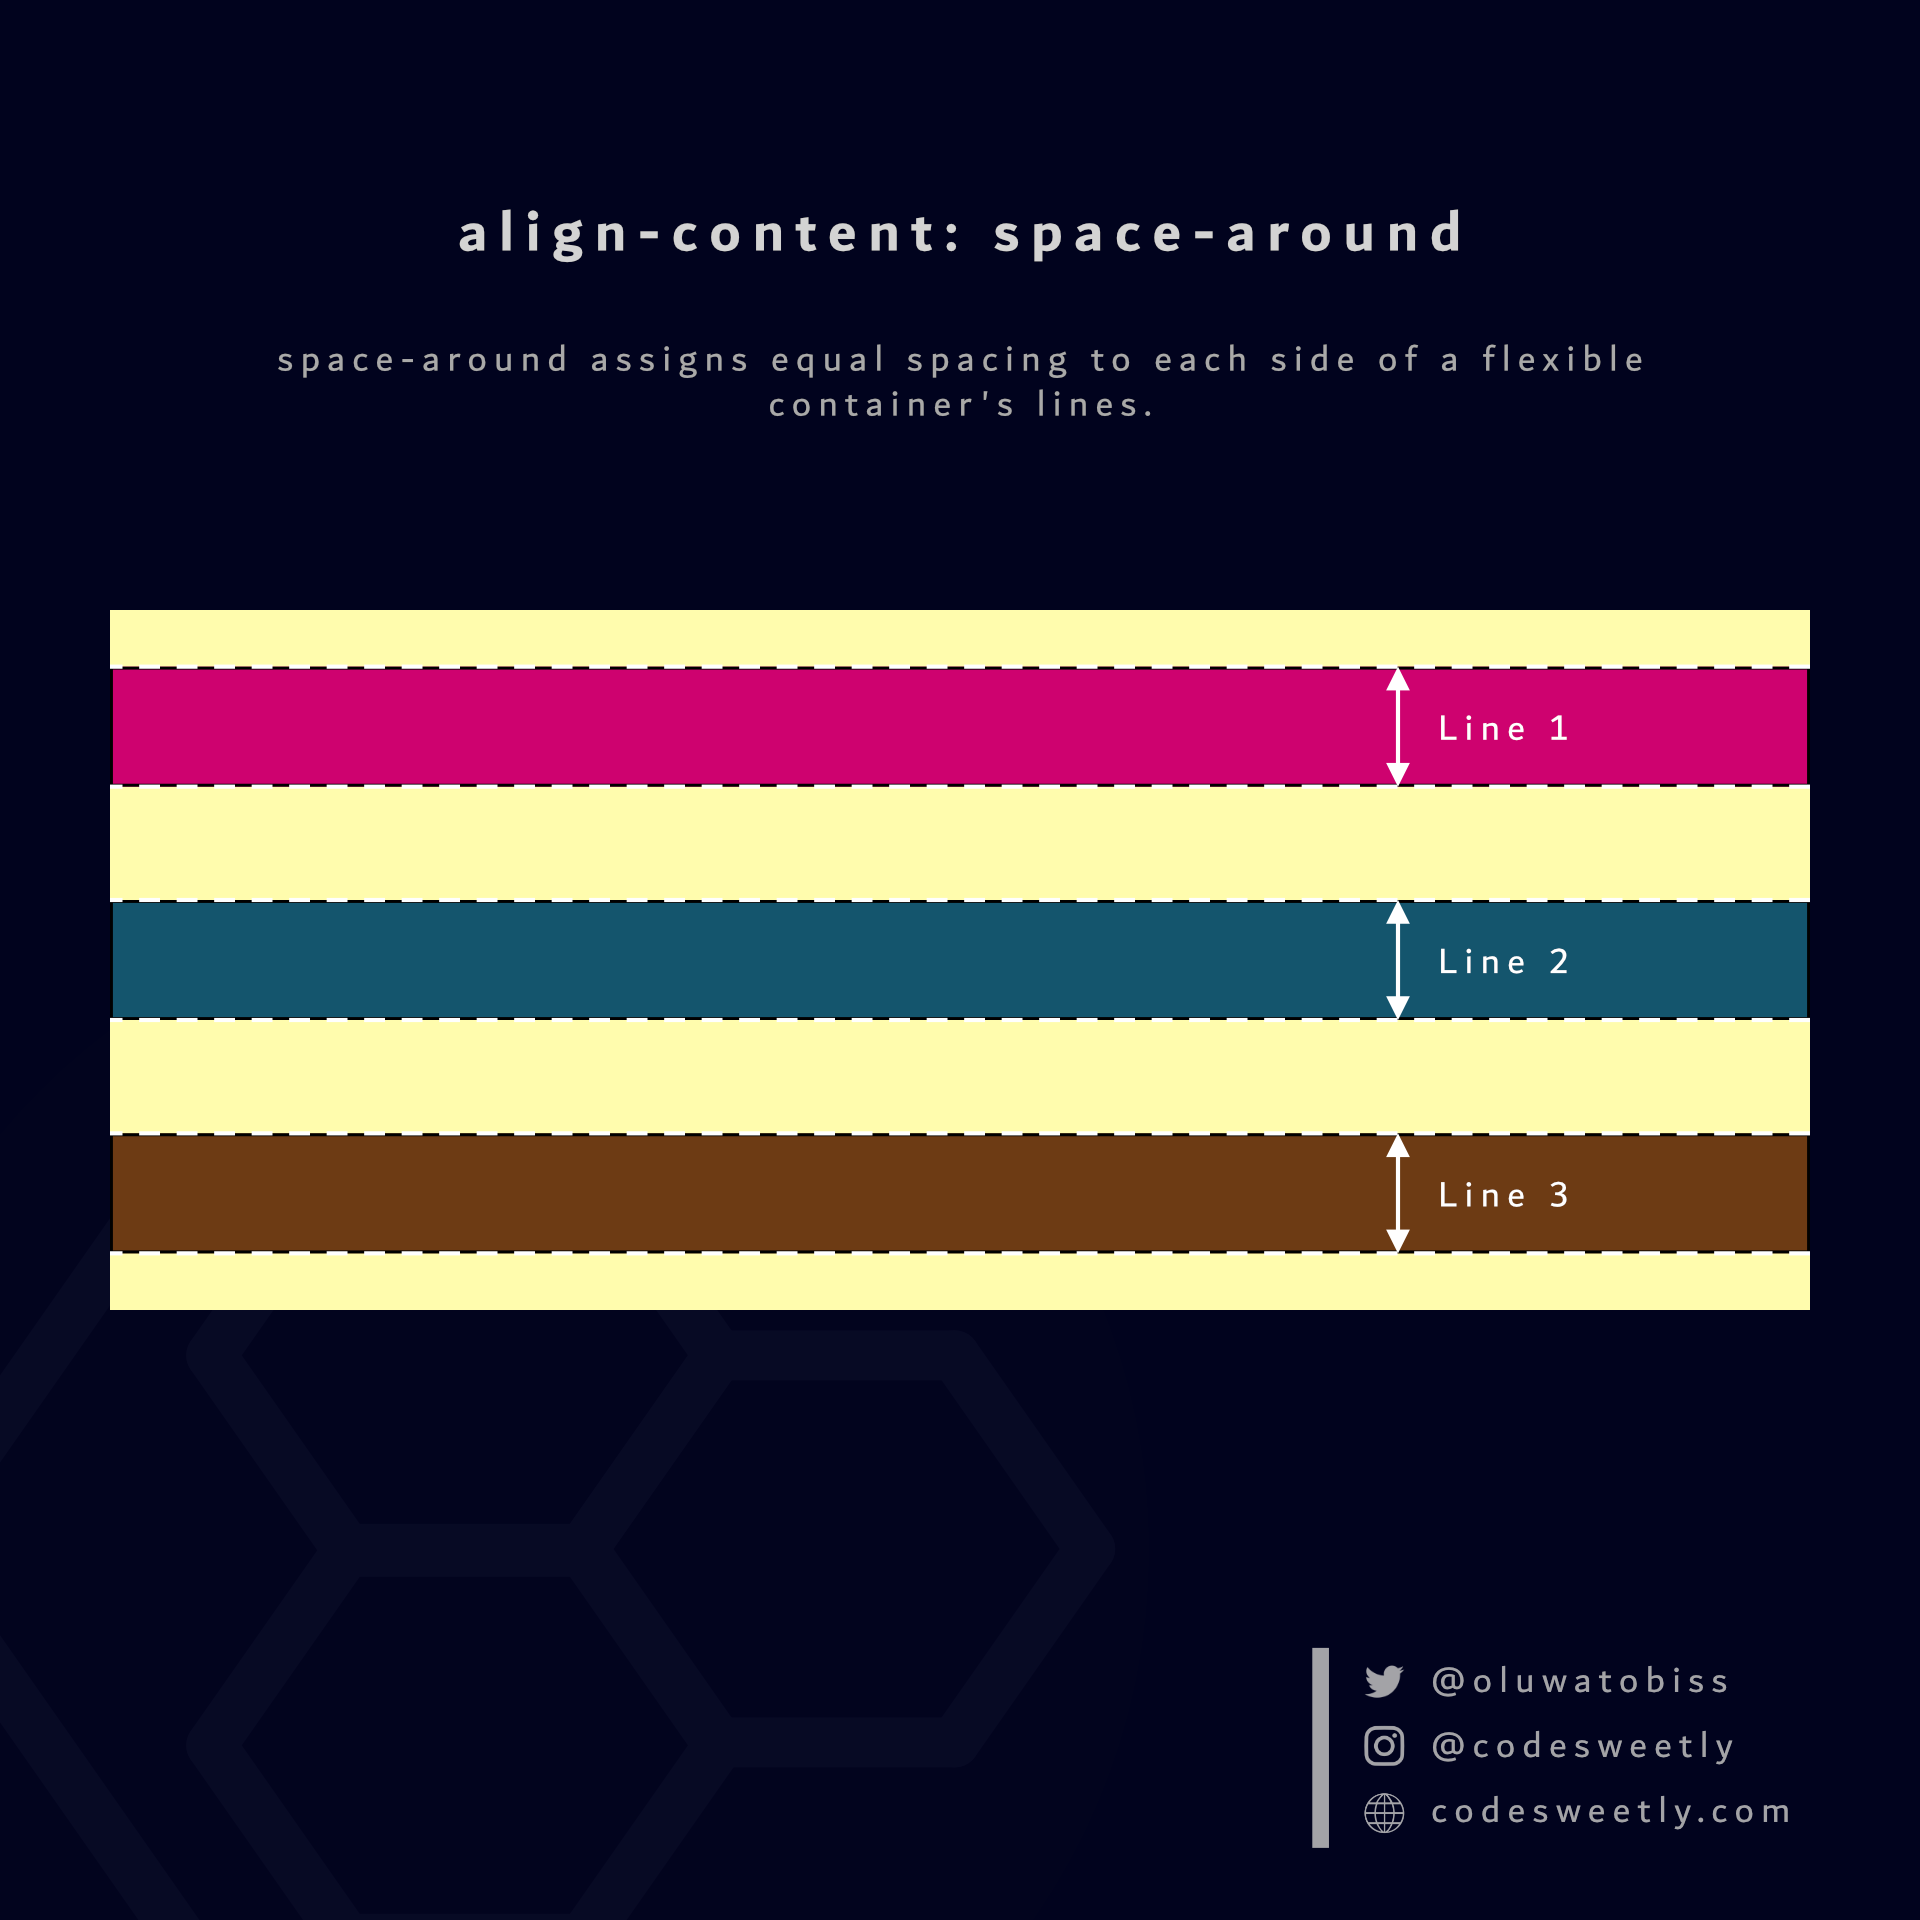 Illustration of align-content&#39;s space-around value